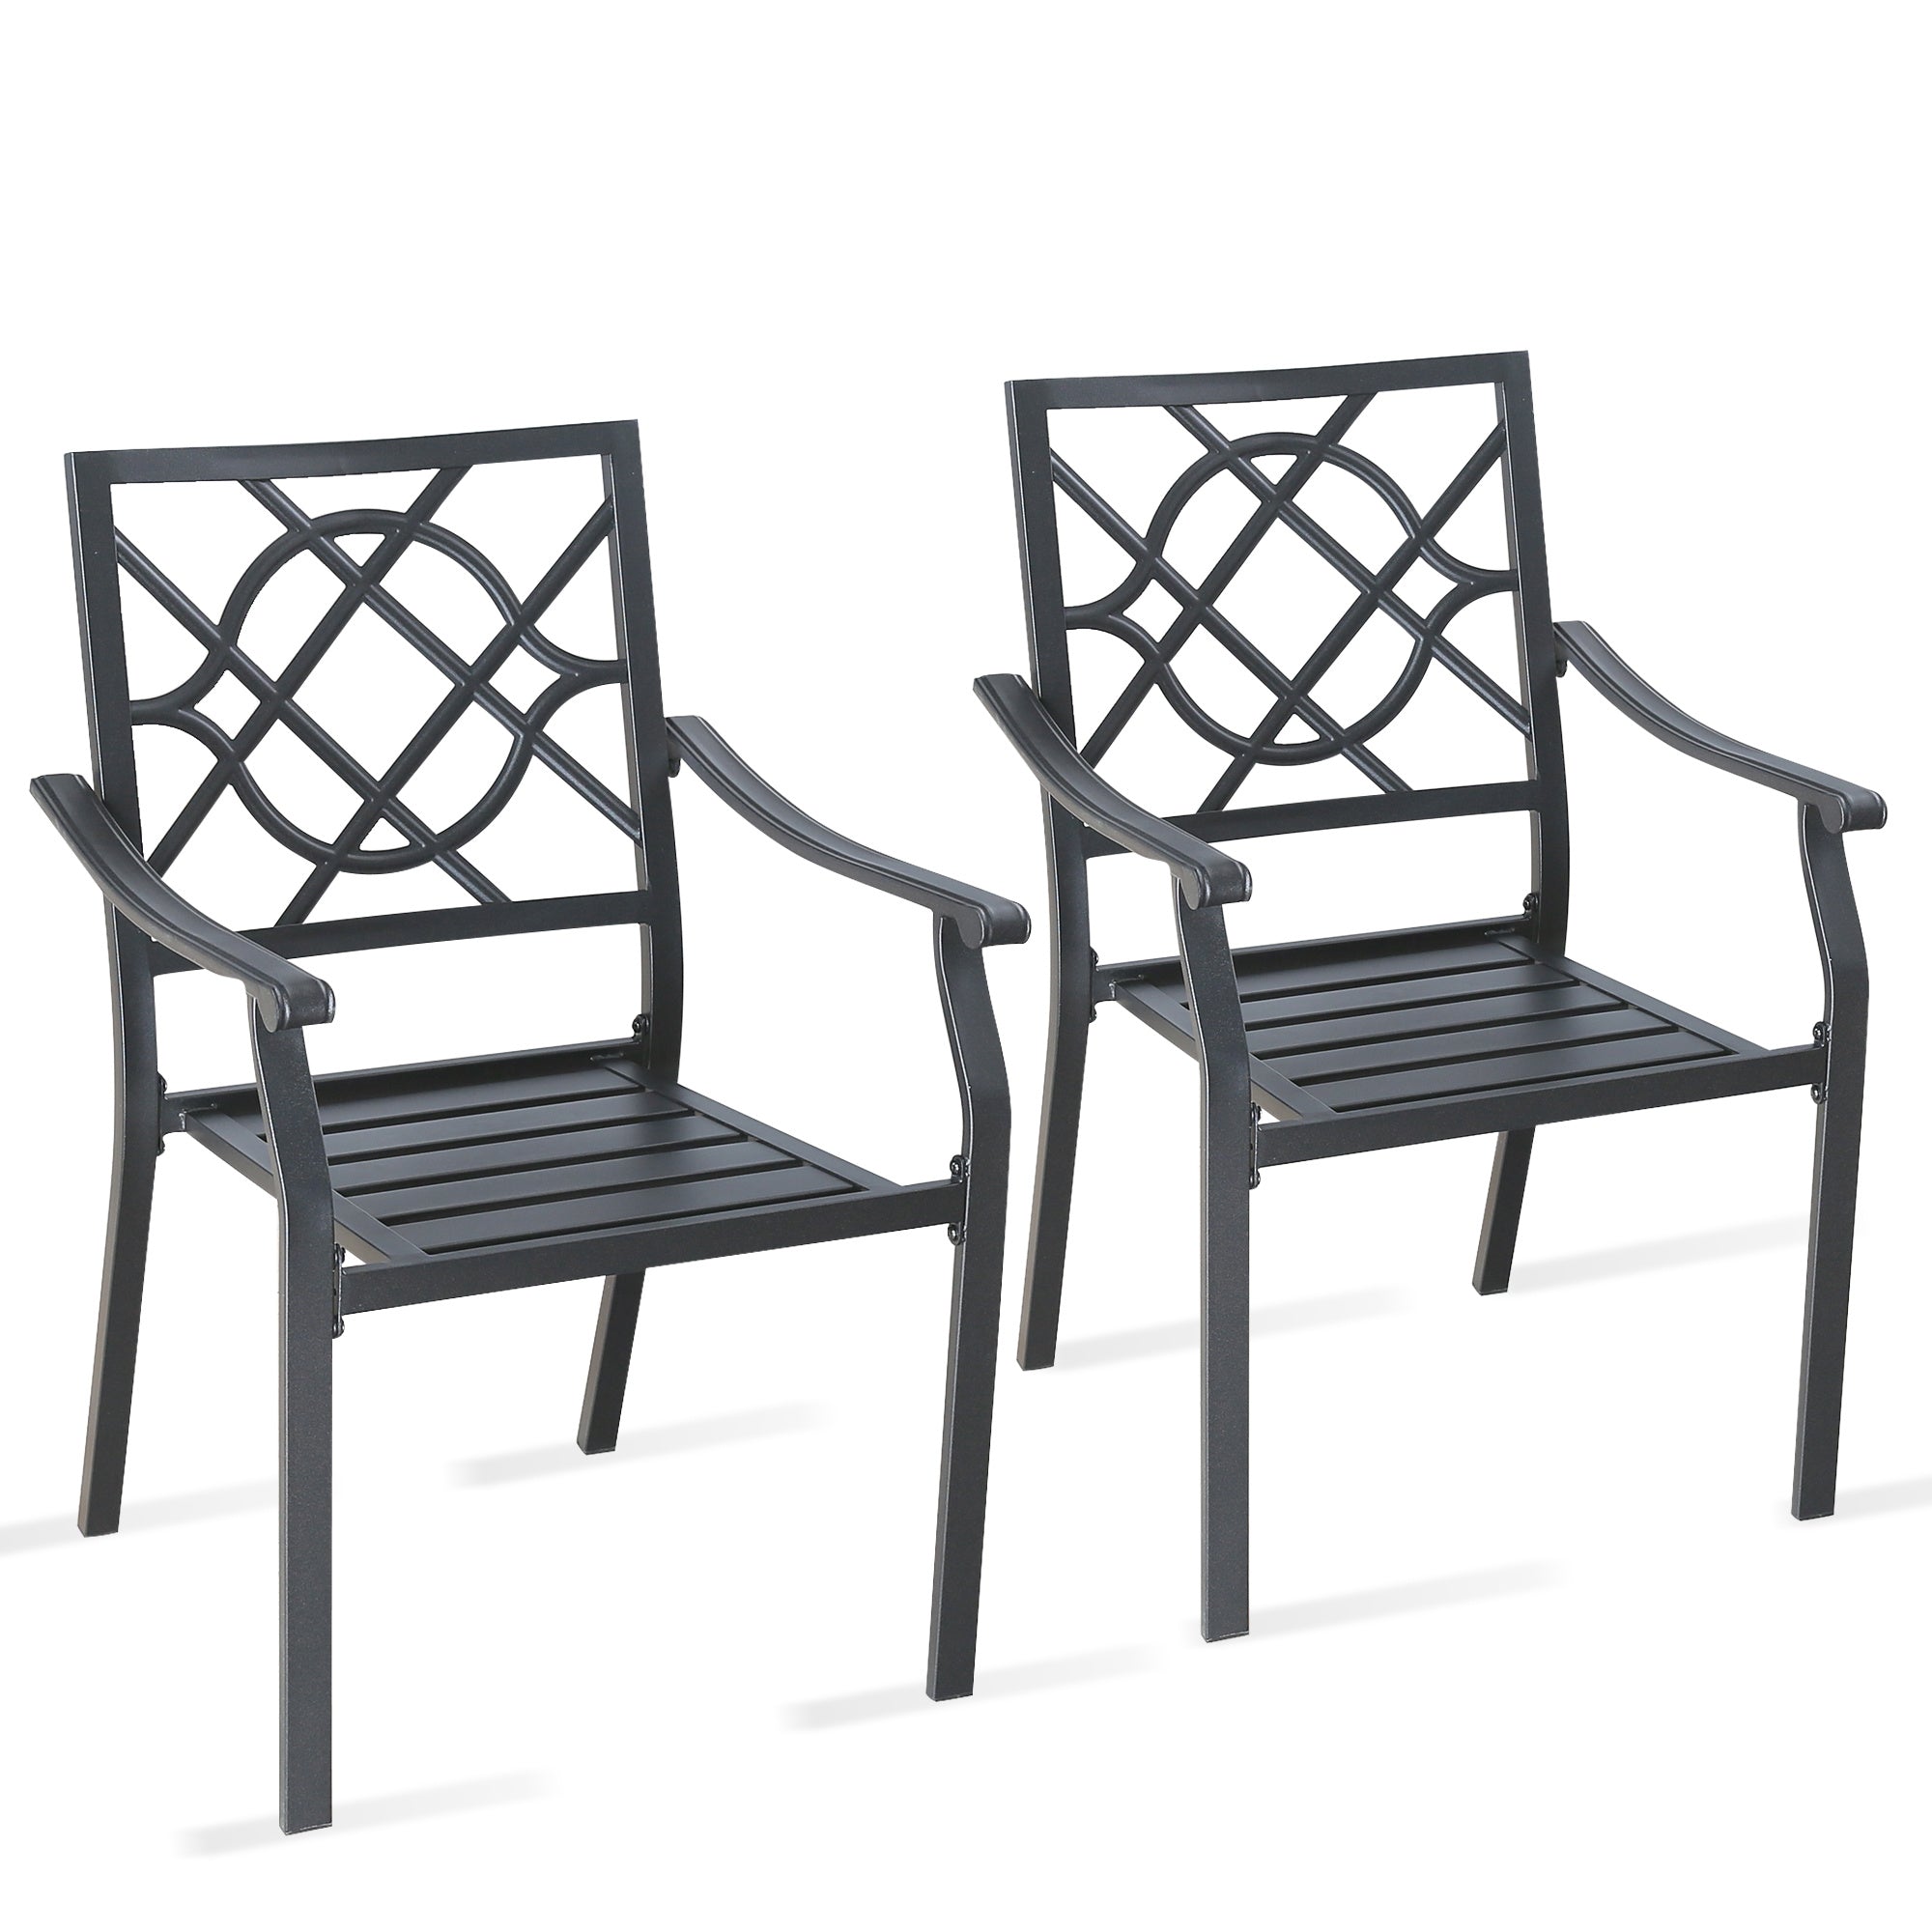 Patio Dining Chairs Outdoor Furniture Chair Set with Steel Frame and Armrest